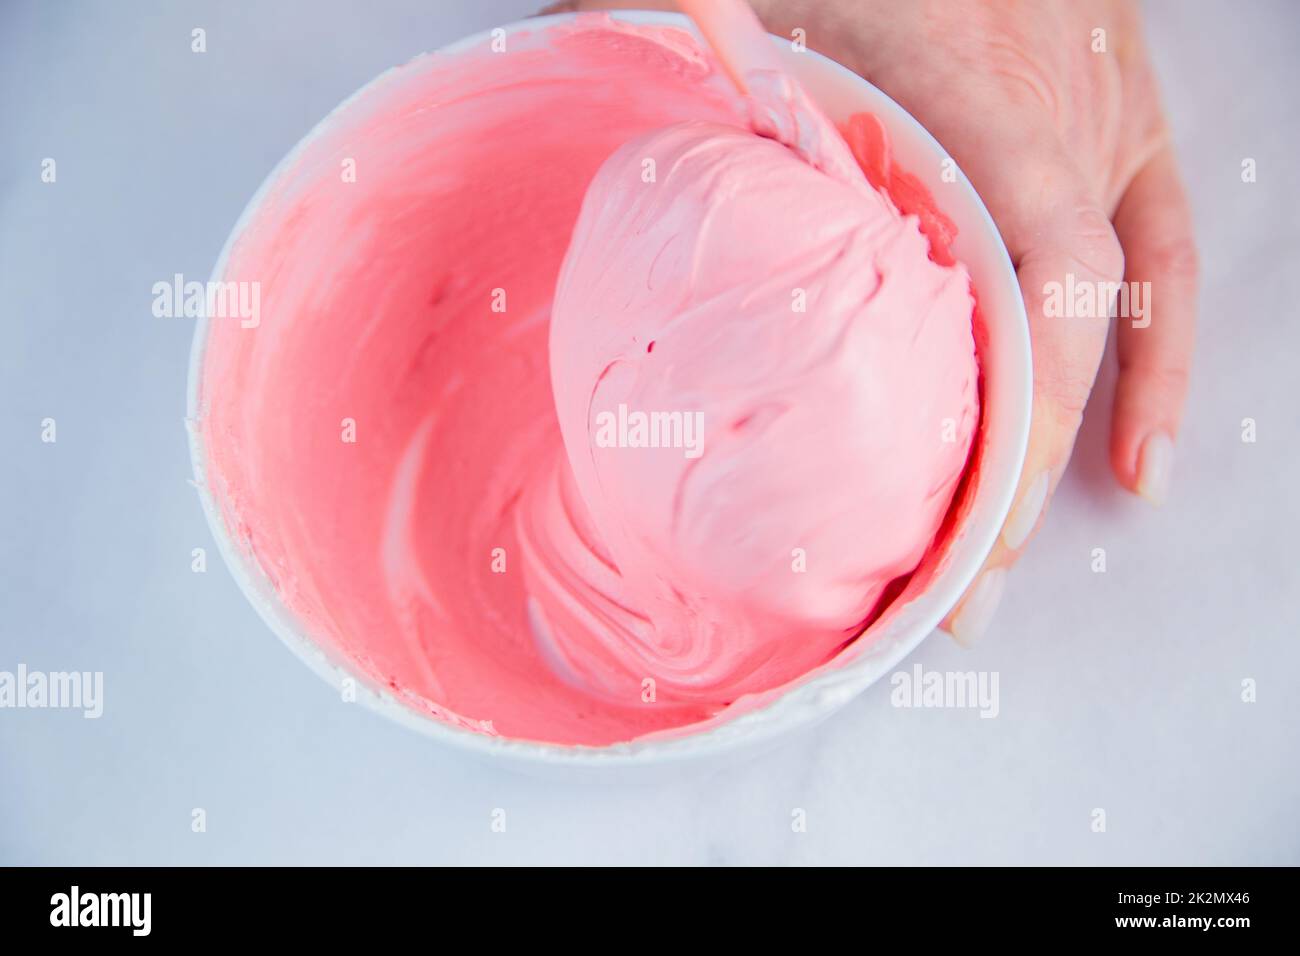 Pink confectionary meringue marengo is mixed in a white bowl on a white marble background by the hands of a pastry chef Stock Photo